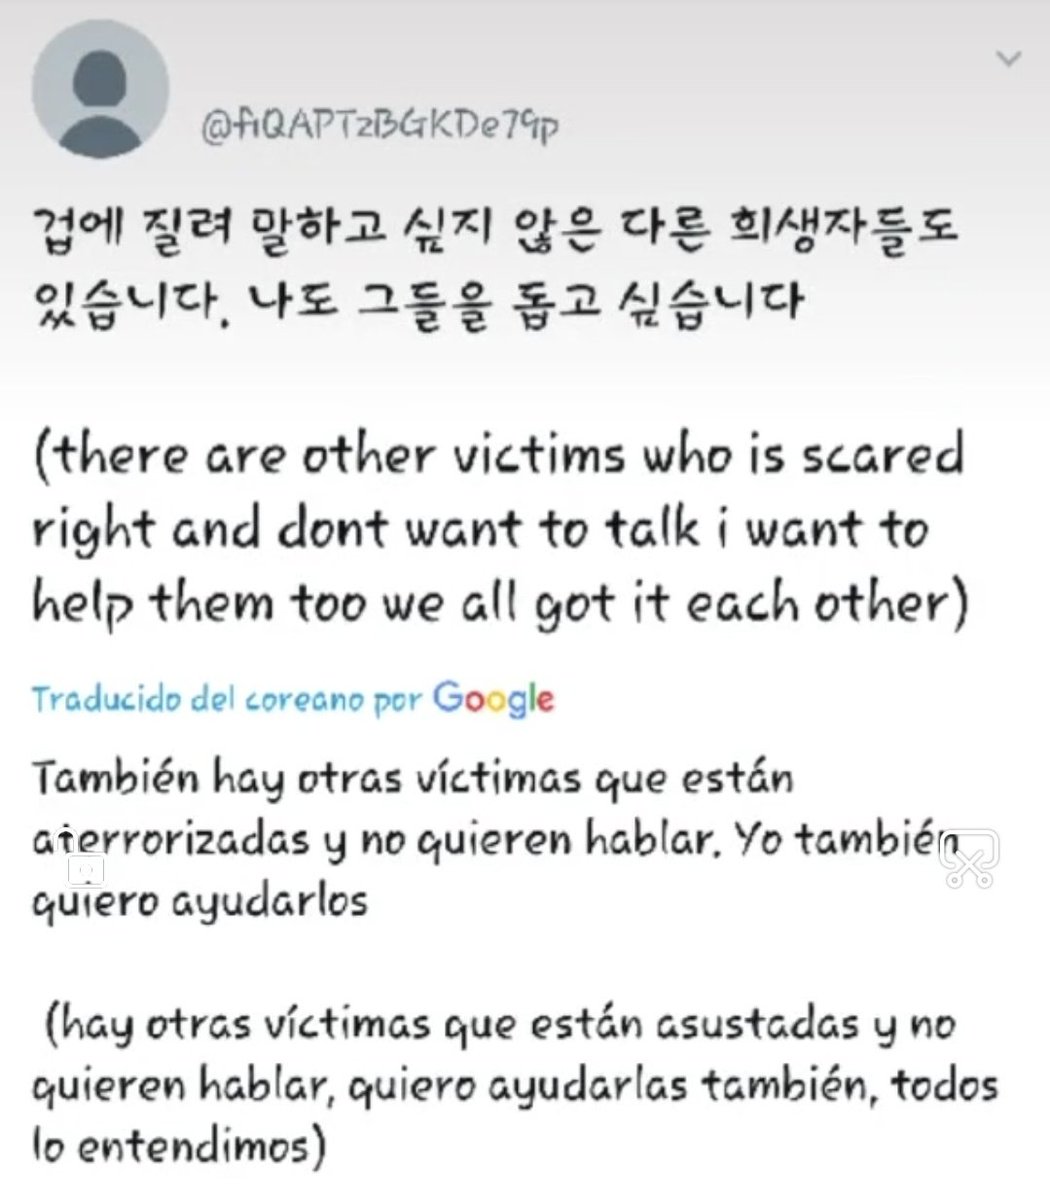 The next story is from another user (@fiQAPTzBGKDe79p), also an alleged victim, of the now implied, Kim Woojin."I couldn't take it anymore, so I took the chance to speak now"